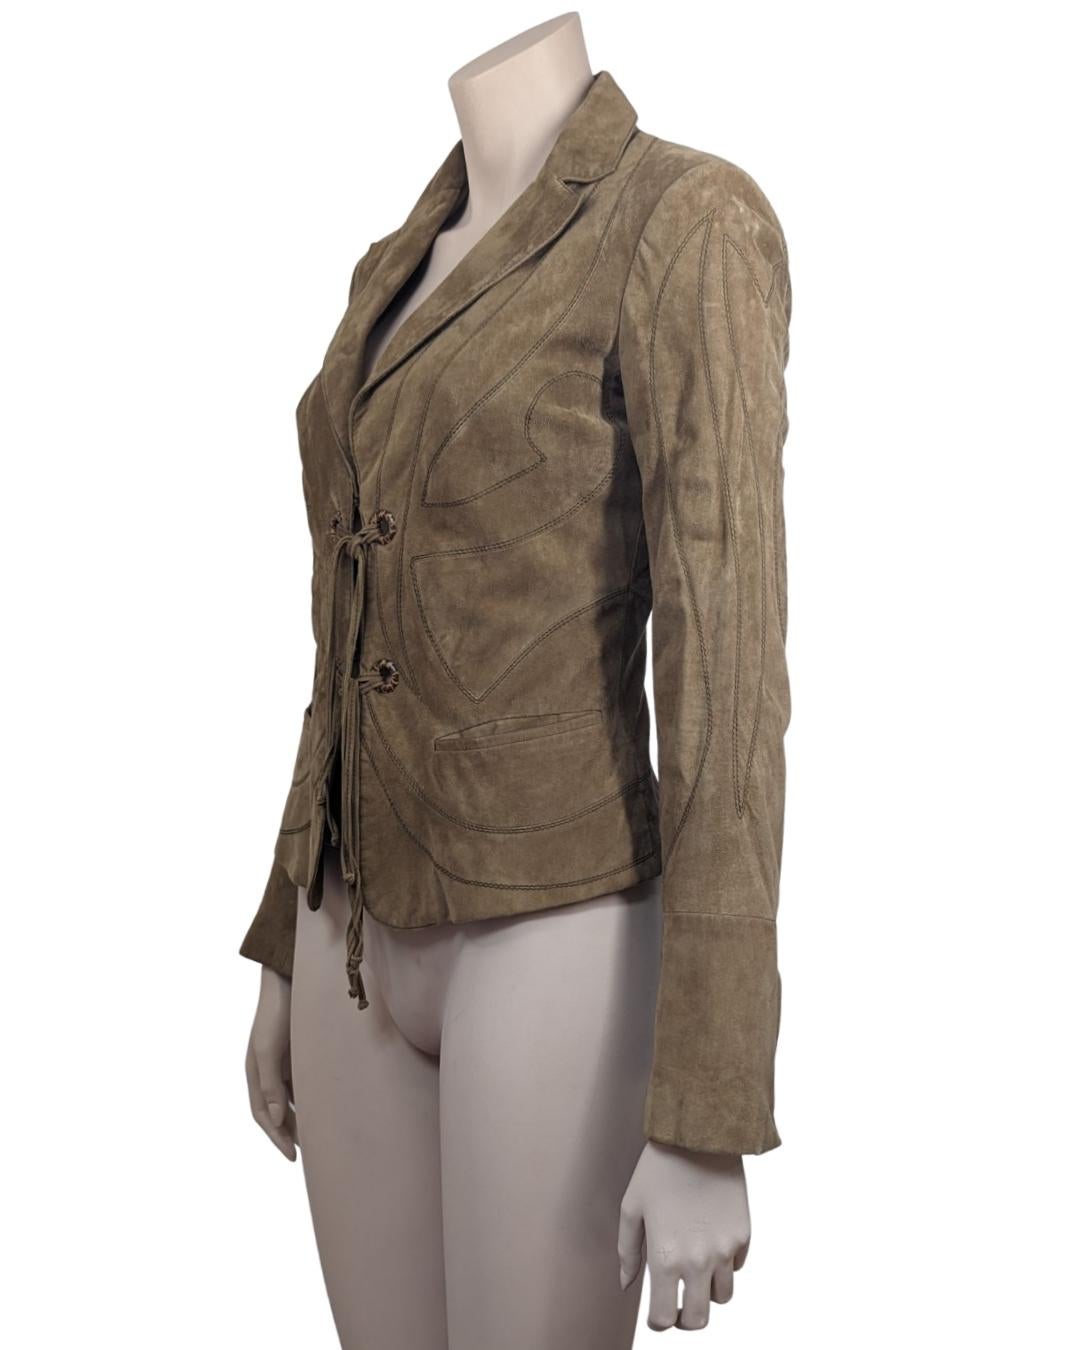 Roberto Cavalli Butterfly Suede Leather Jacket For Sale 3